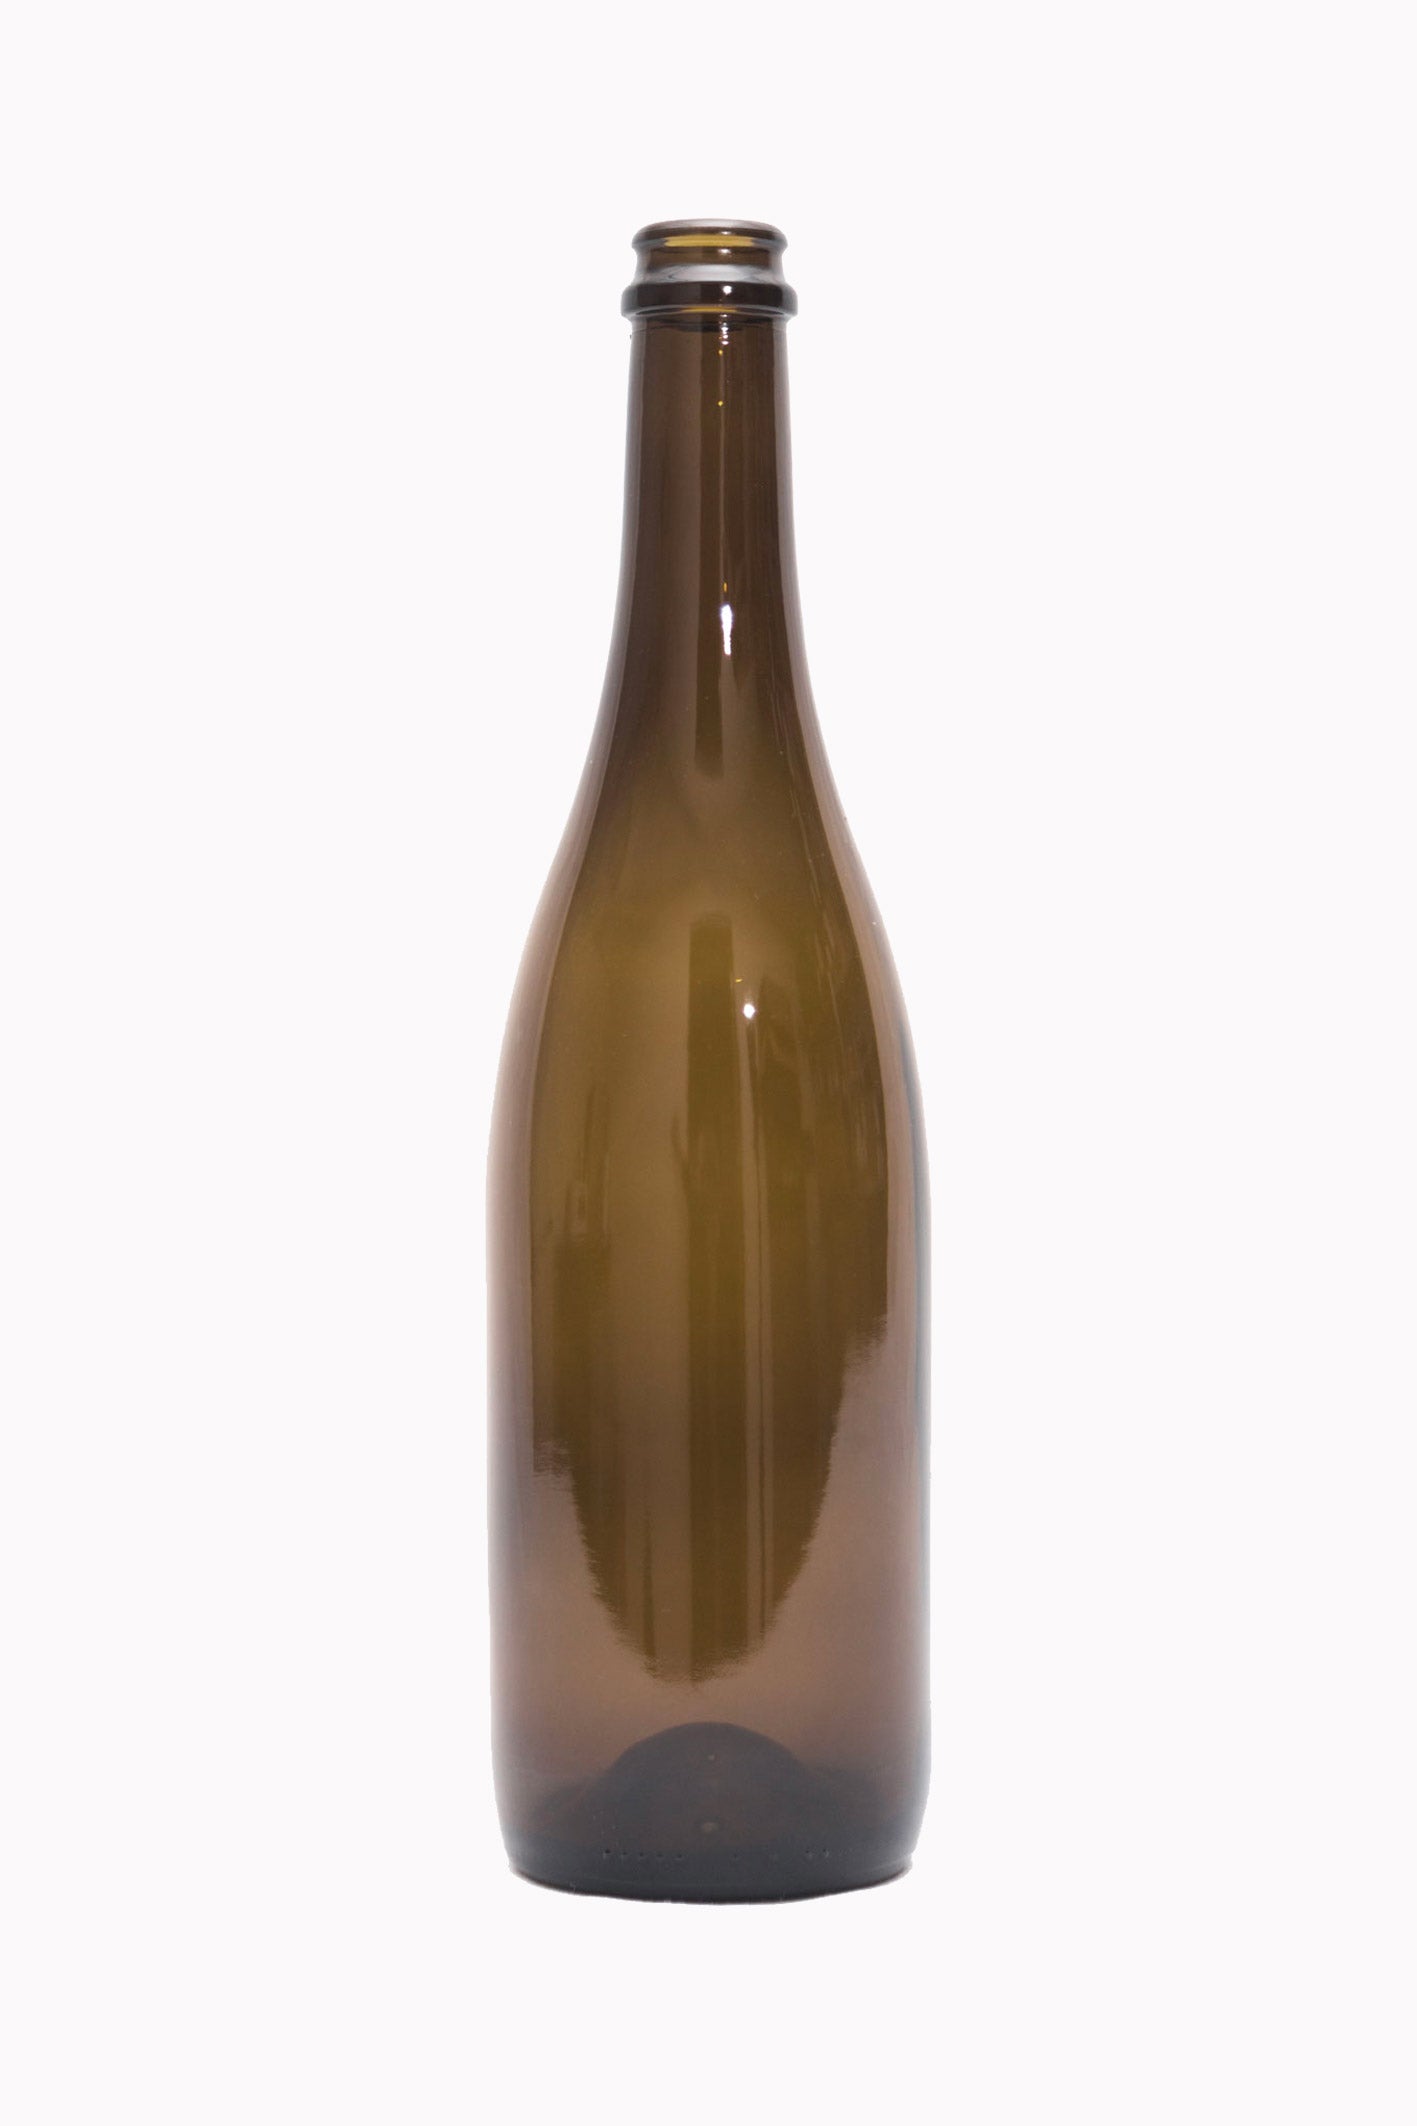 This is 7023 AG, also known as Juliet, California Bottles’ flagship Antique Green Sparkling (Champagne) bottle.